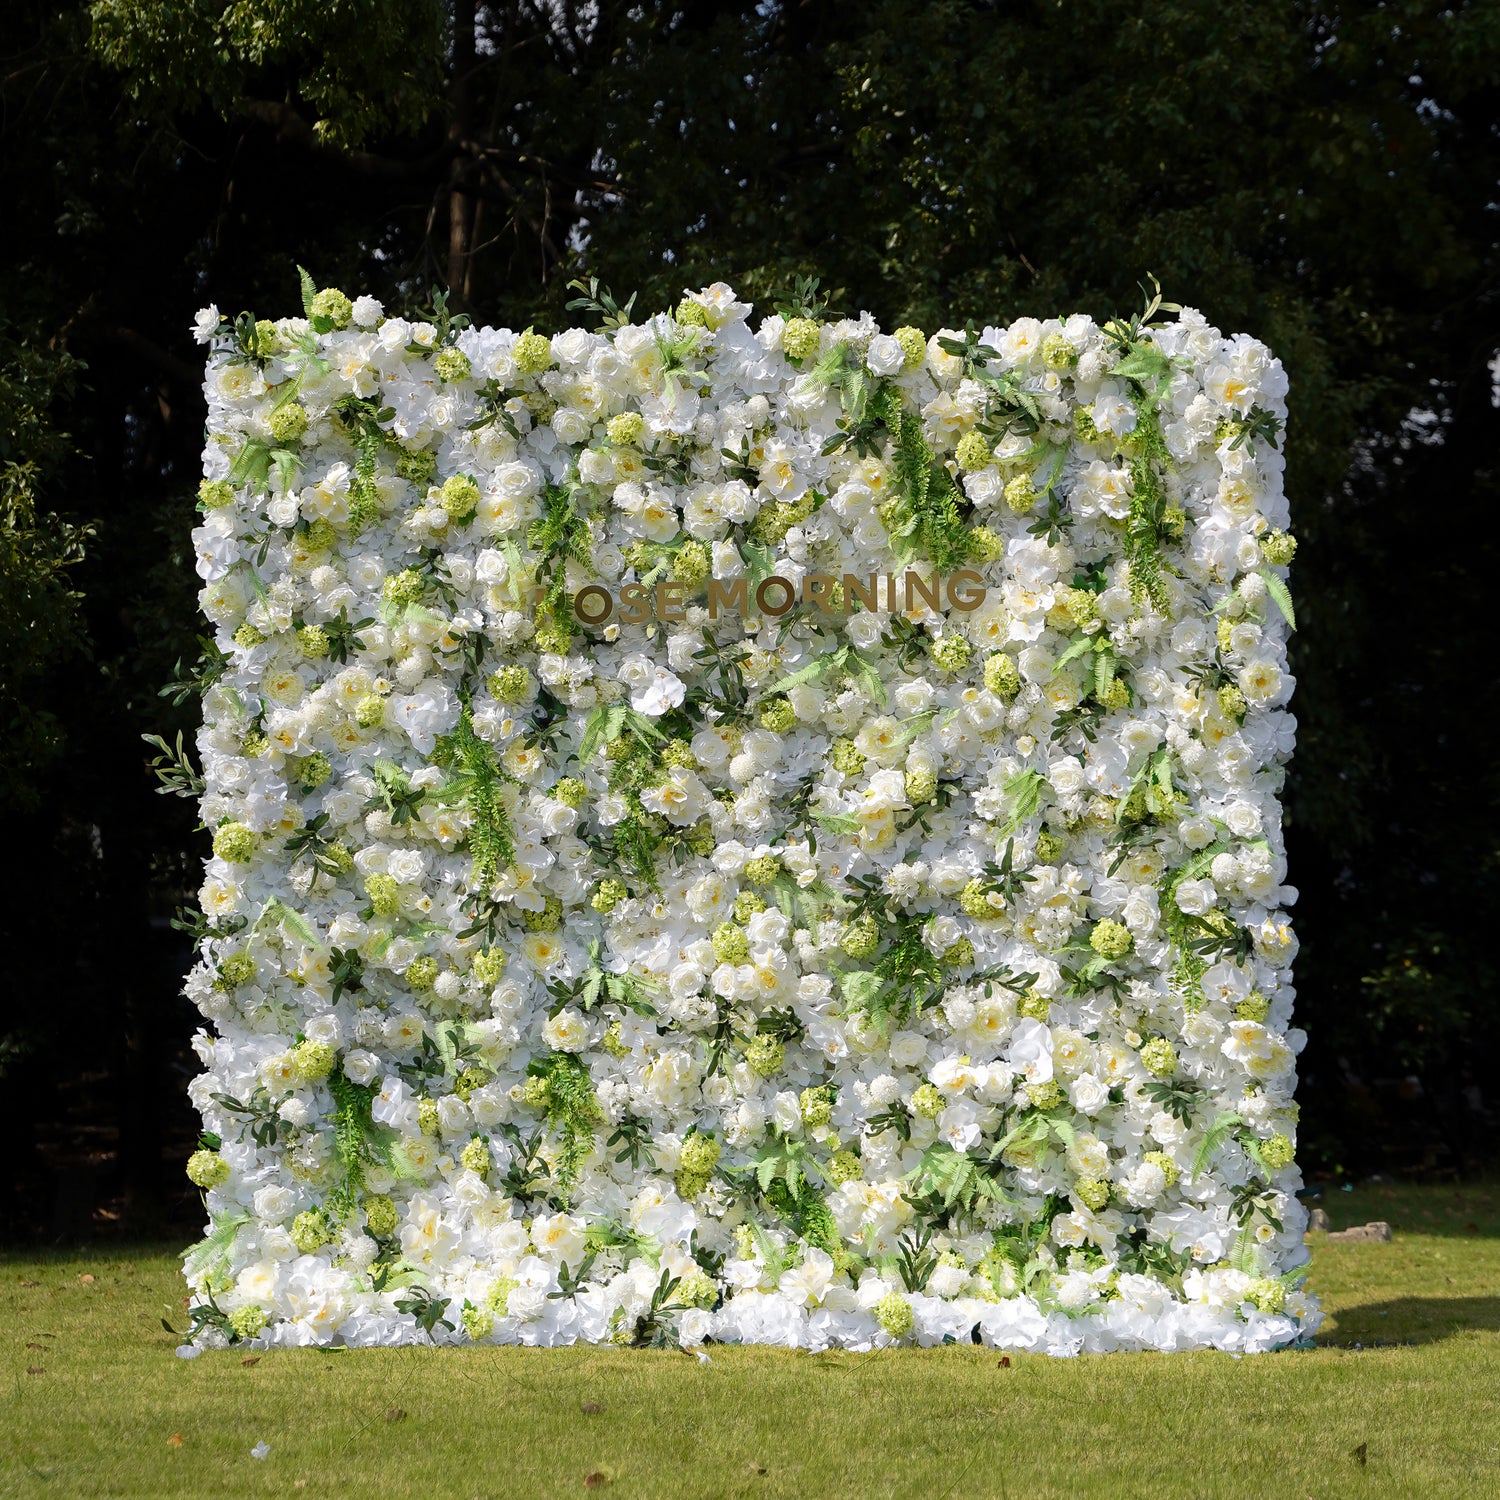 Fairy 5D Garden Series New Fabric Artificial rolling up curtain flower wall Rose Morning